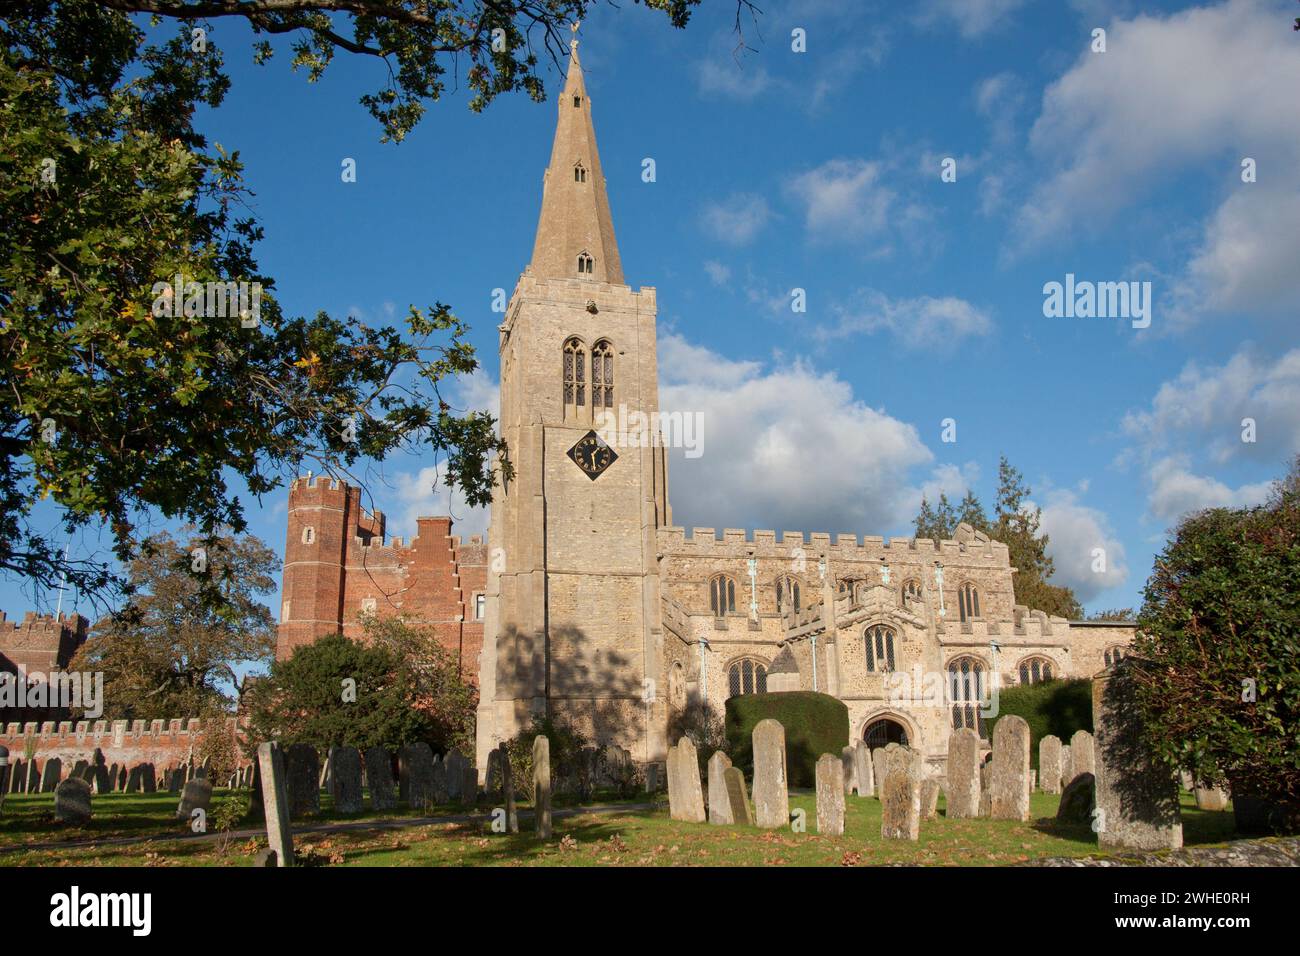 Buckden Towers, Bishops Palace & St Mary's church, Buckden, St Neots, Cambridgeshire, England Stock Photo